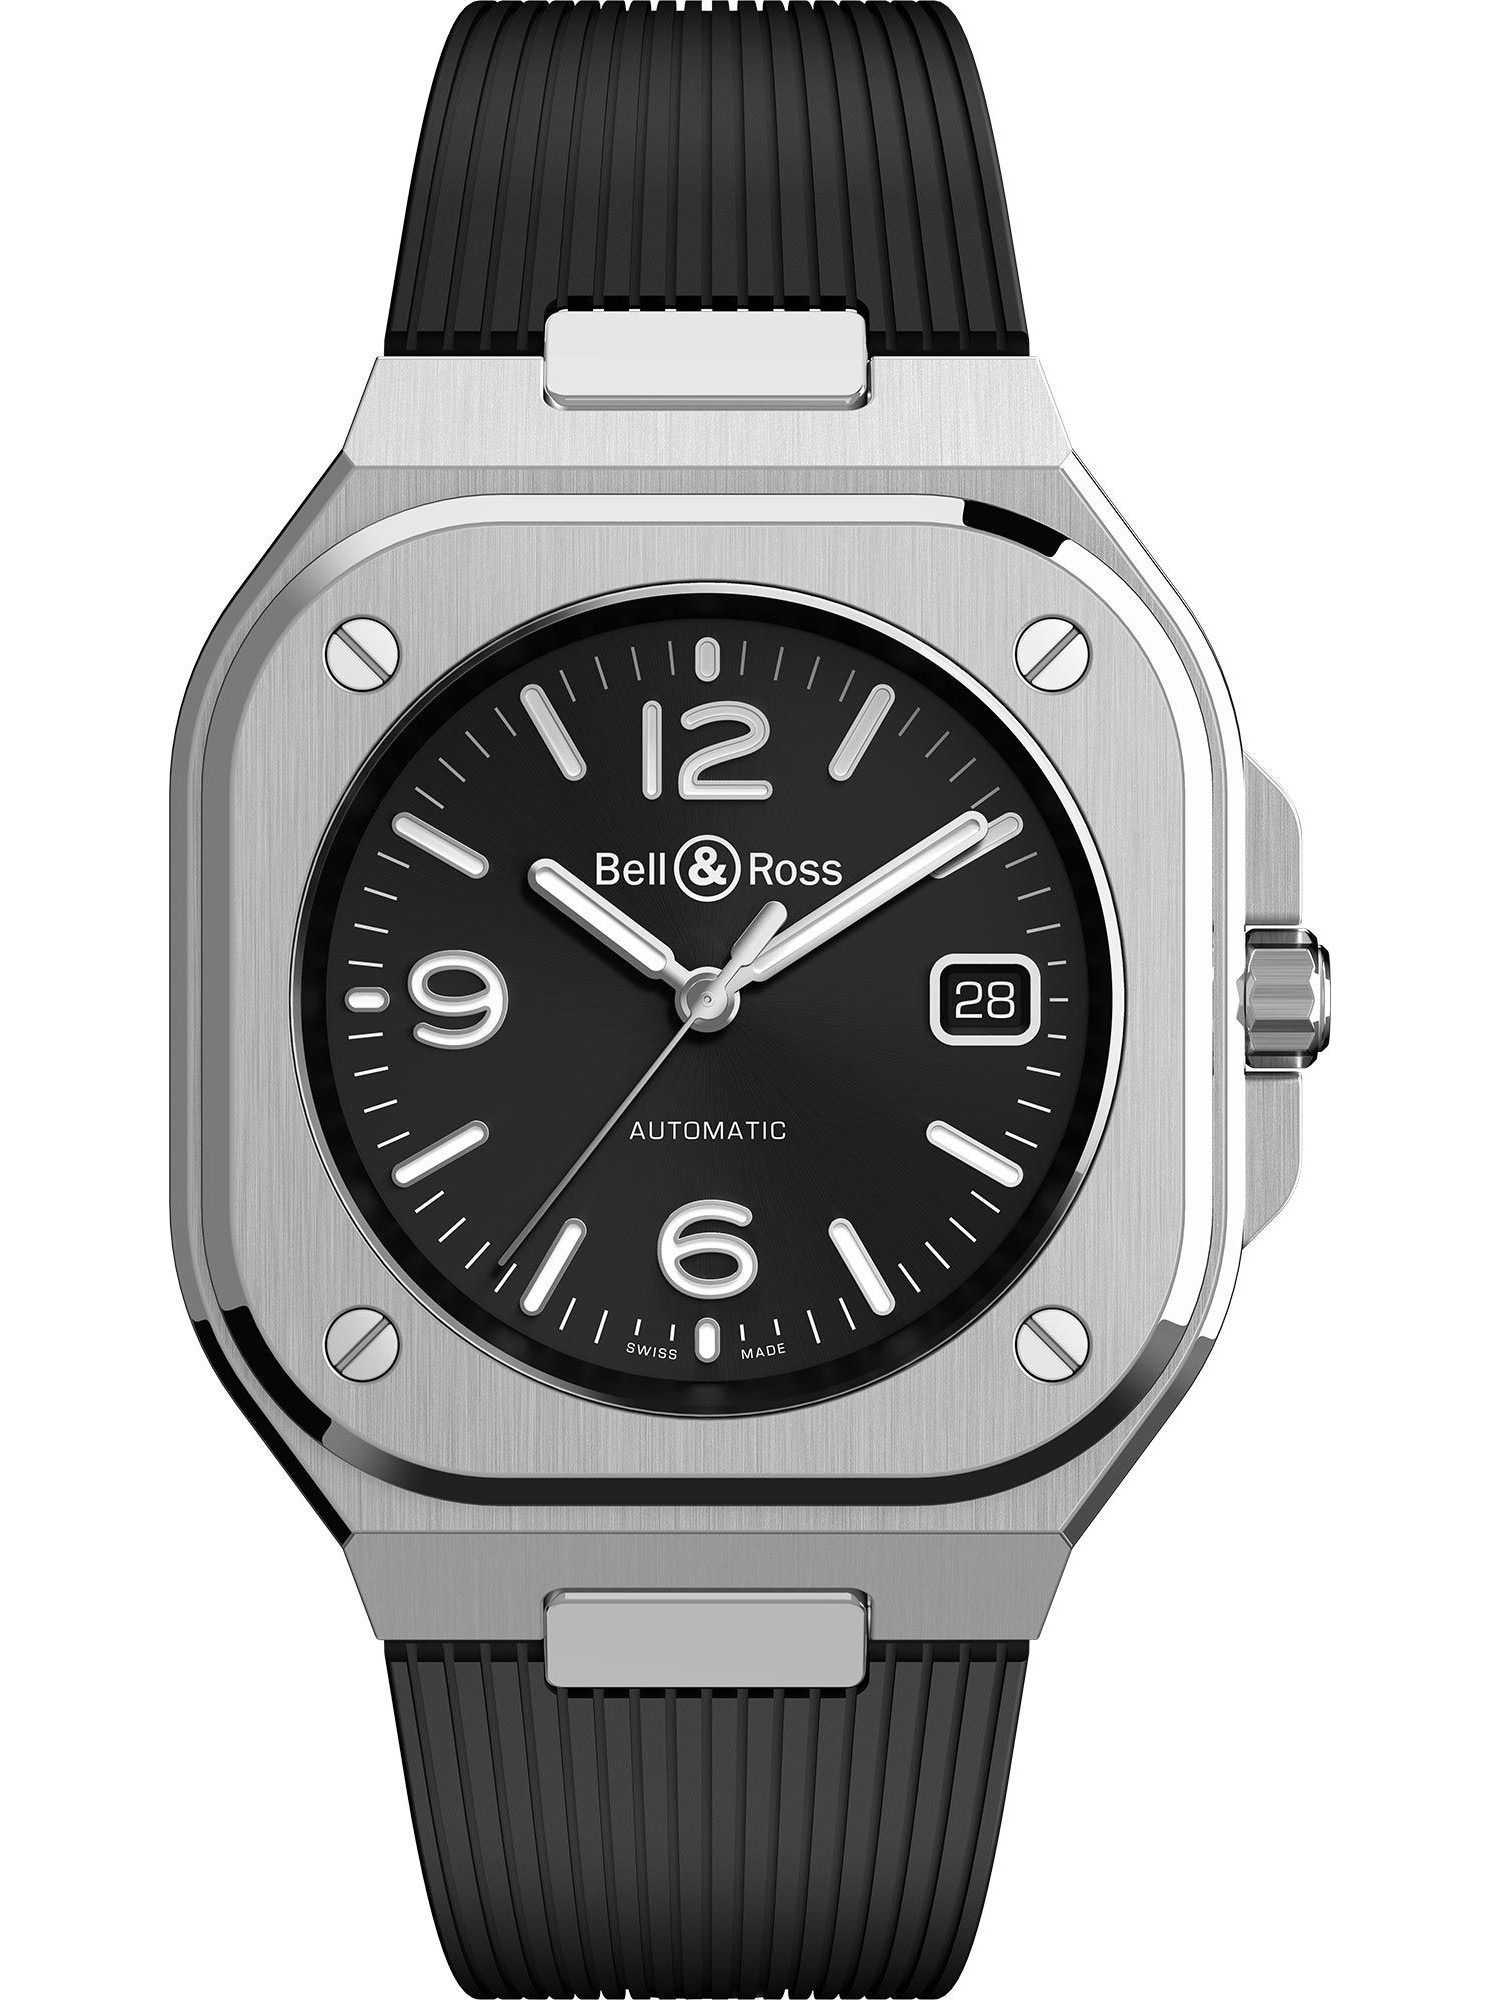 Bell & Ross Urban BR 05 Auto Black Dial 40 mm Automatic Watch For Men - 1